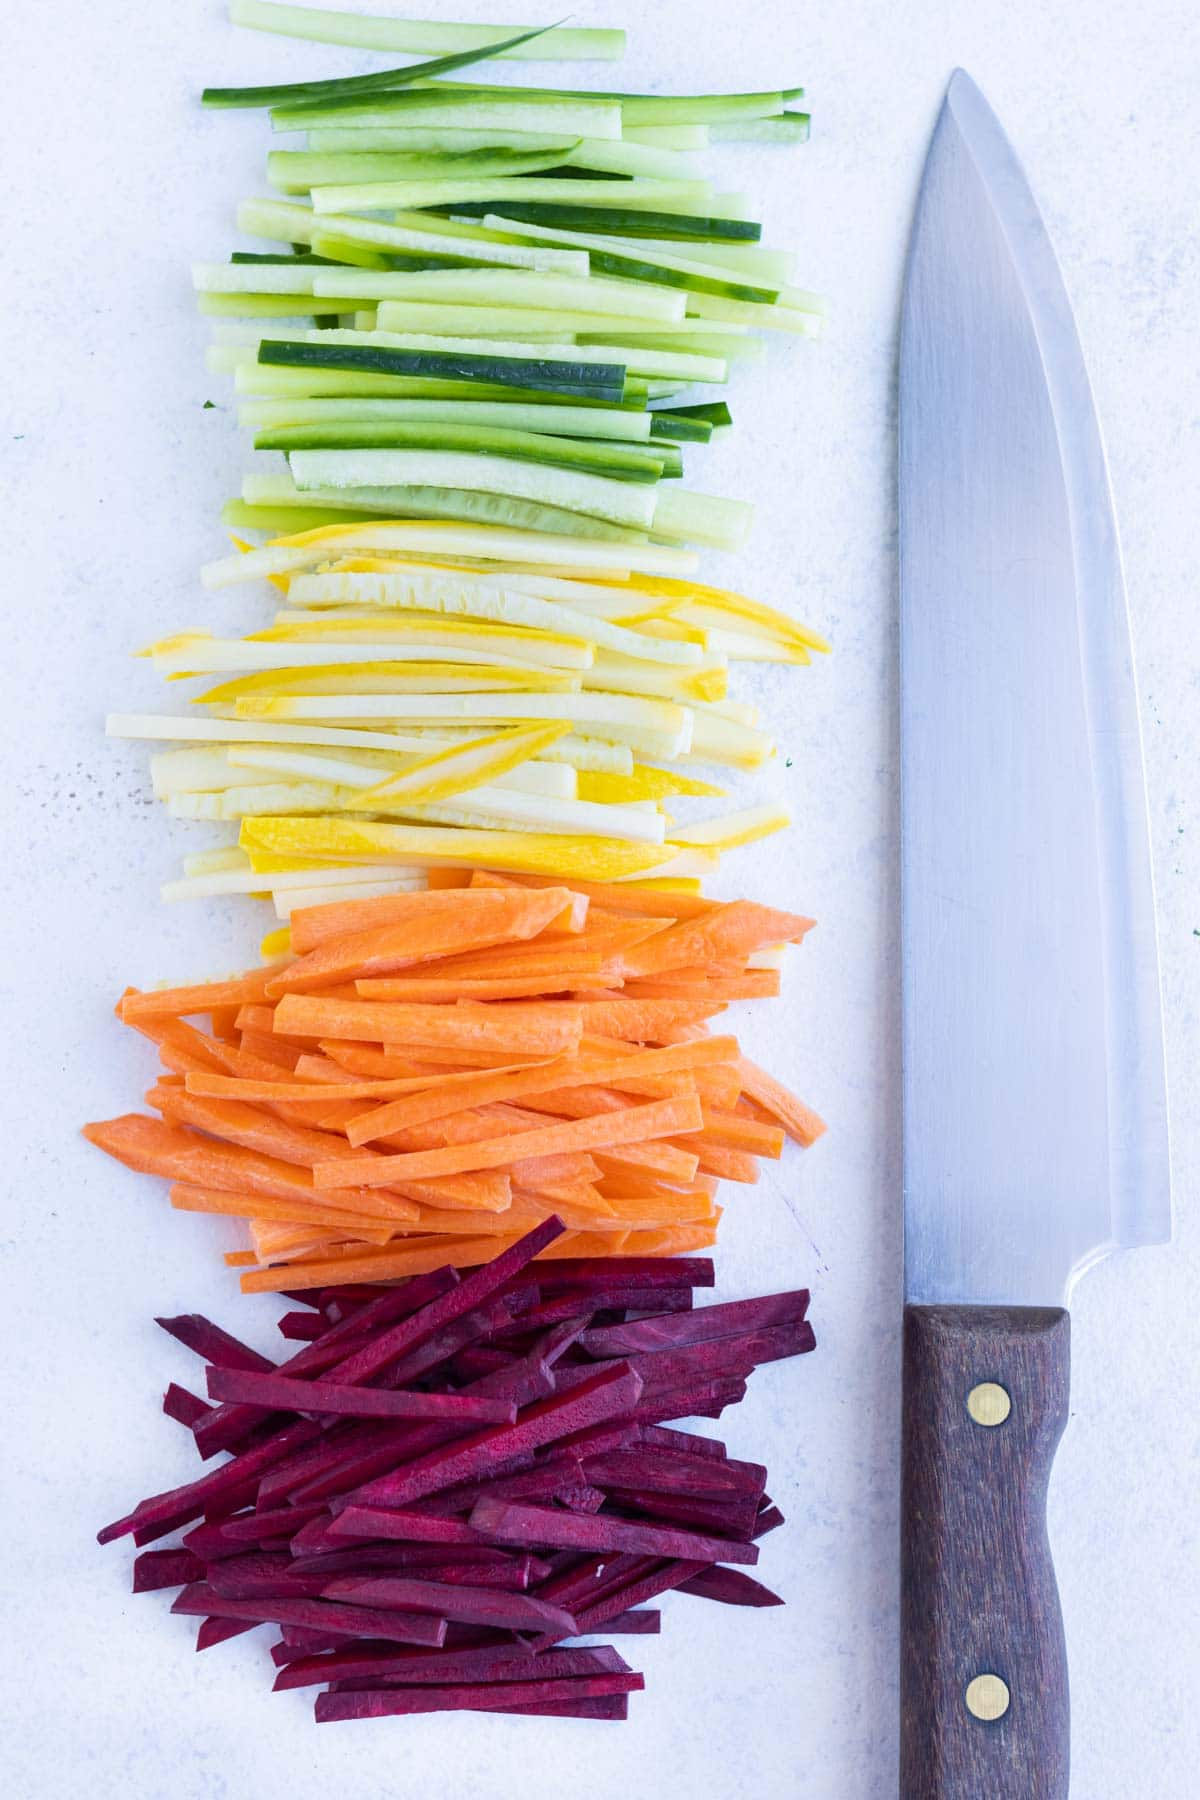 A knife is set next to a pile of Julienne vegetables.